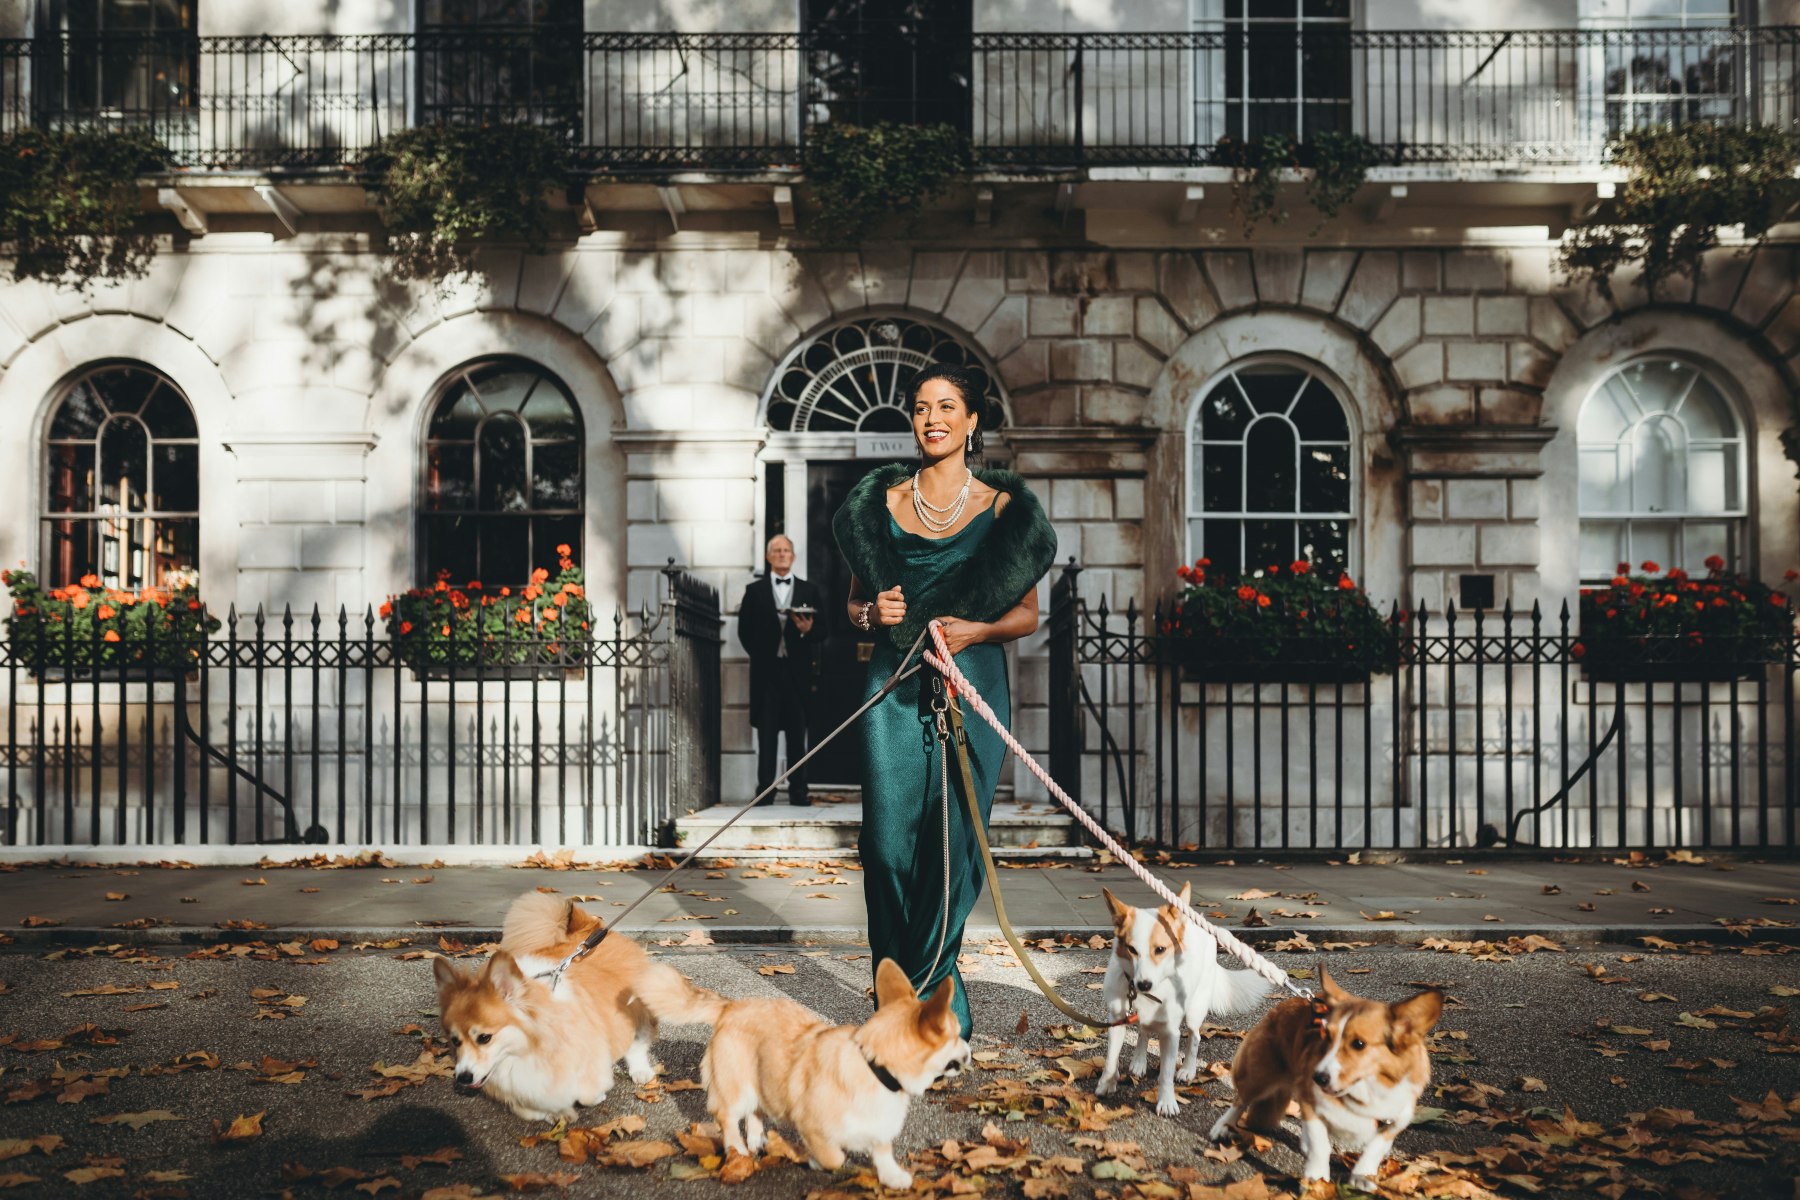 A picture of a Royal Affair guest with a beautiful green gown and four corgis in front of the townhouse